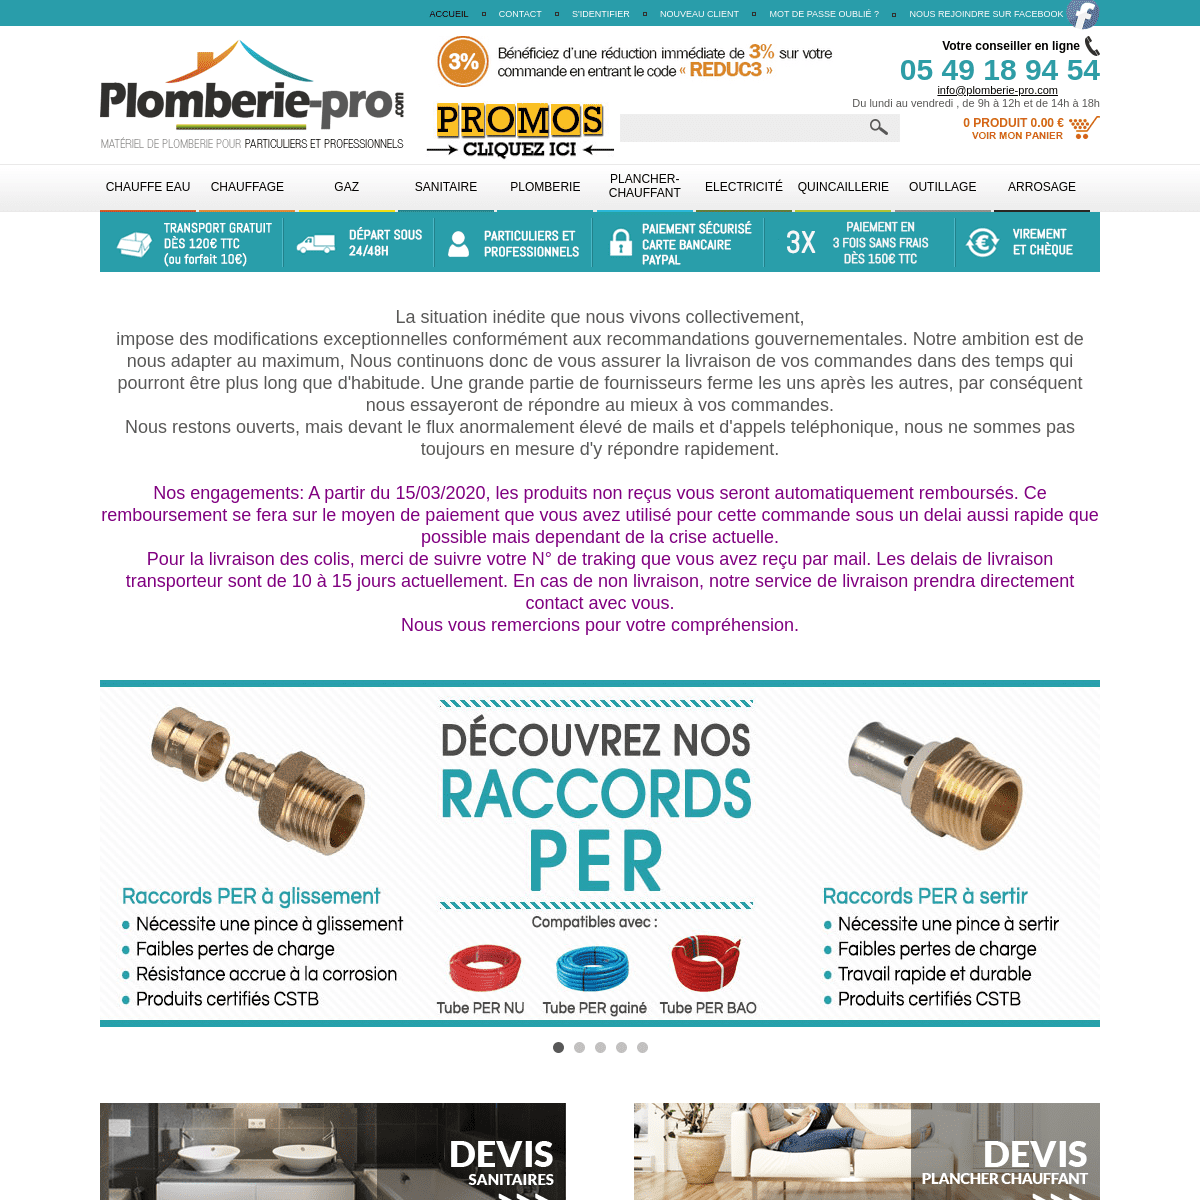 A complete backup of plomberie-pro.com